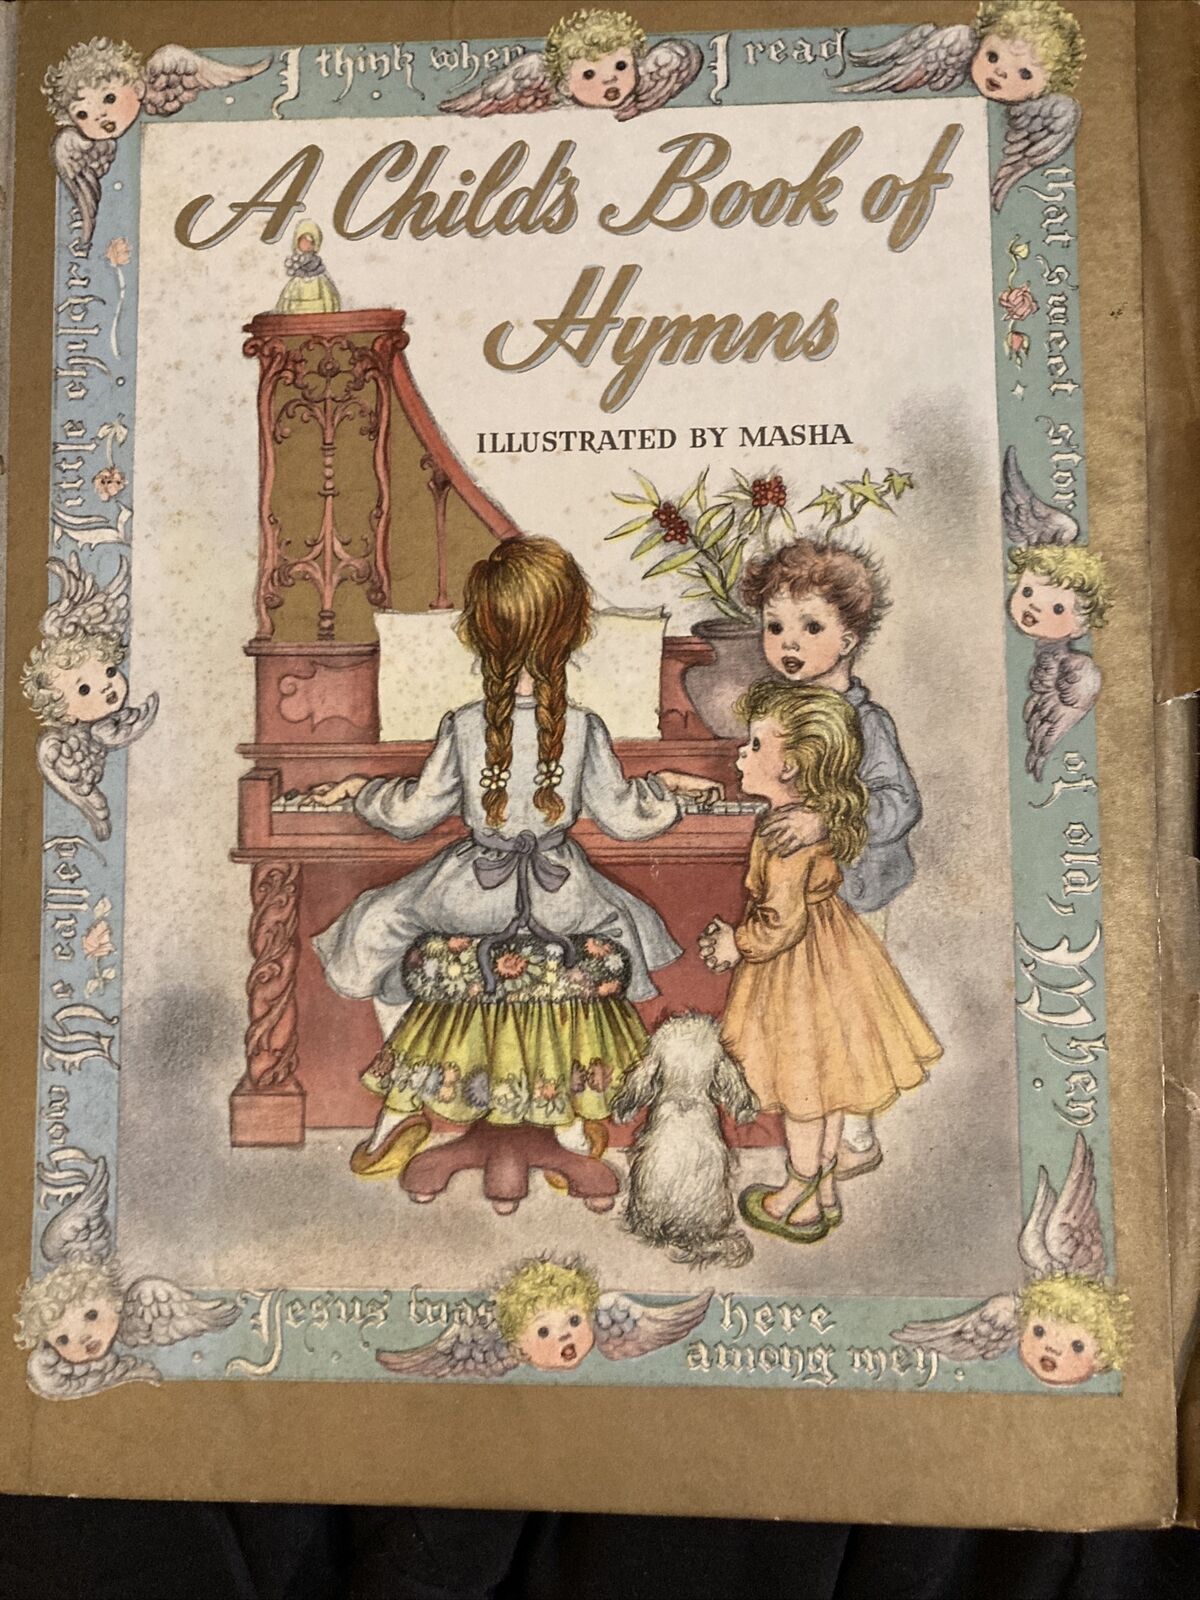 A Child\'s Book of Hymns 1945 Hardcover Illustrated by Masha - 1st Edition